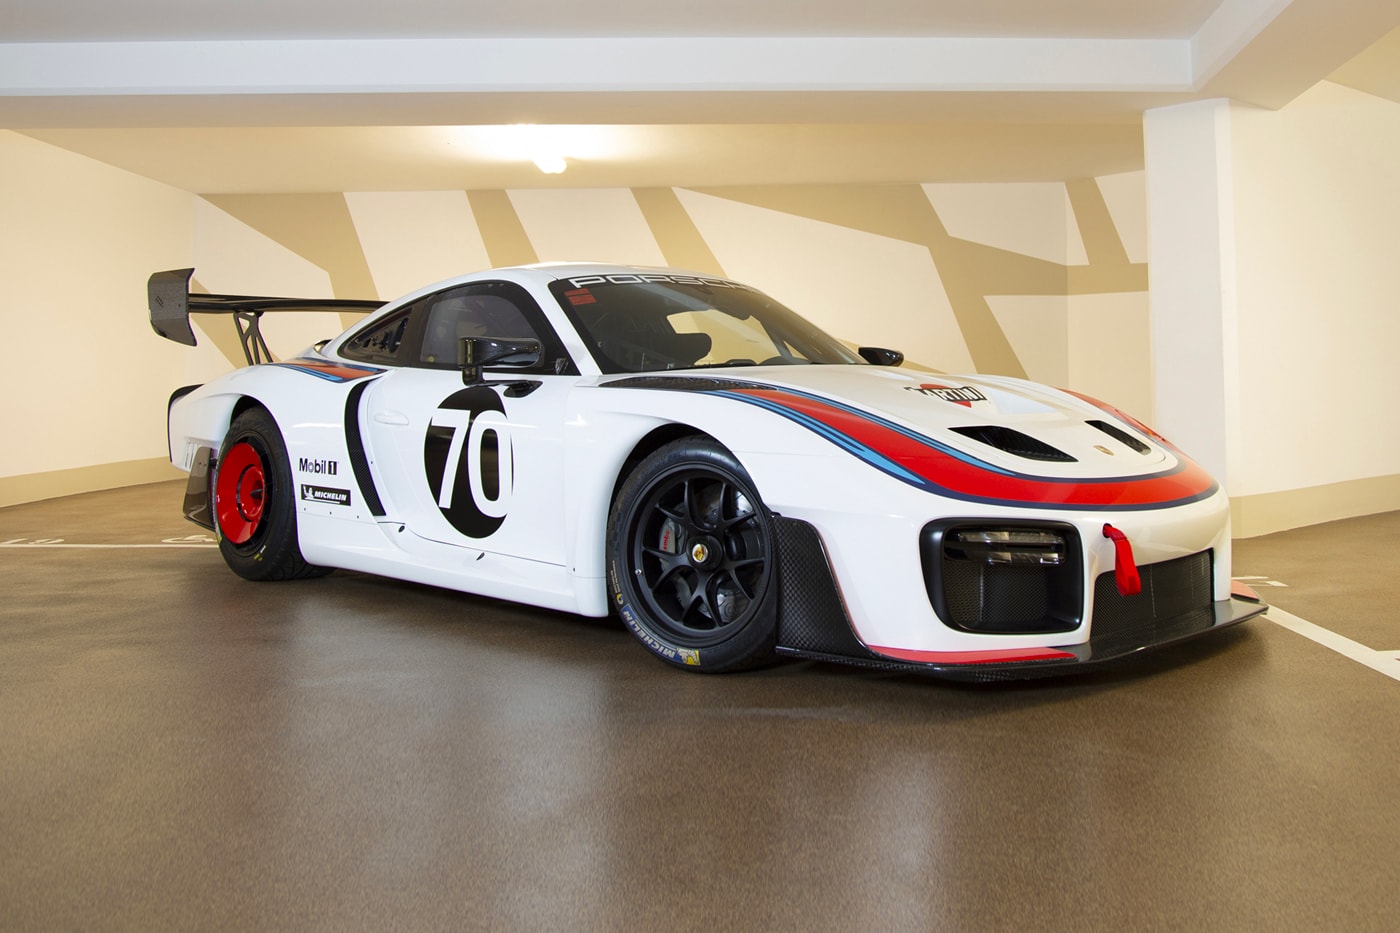 2020 Porsche 935 With Zero Miles up for Auction number 2 of 77 built  twin-turbocharged 3.8-liter flat-six 700 horsepower